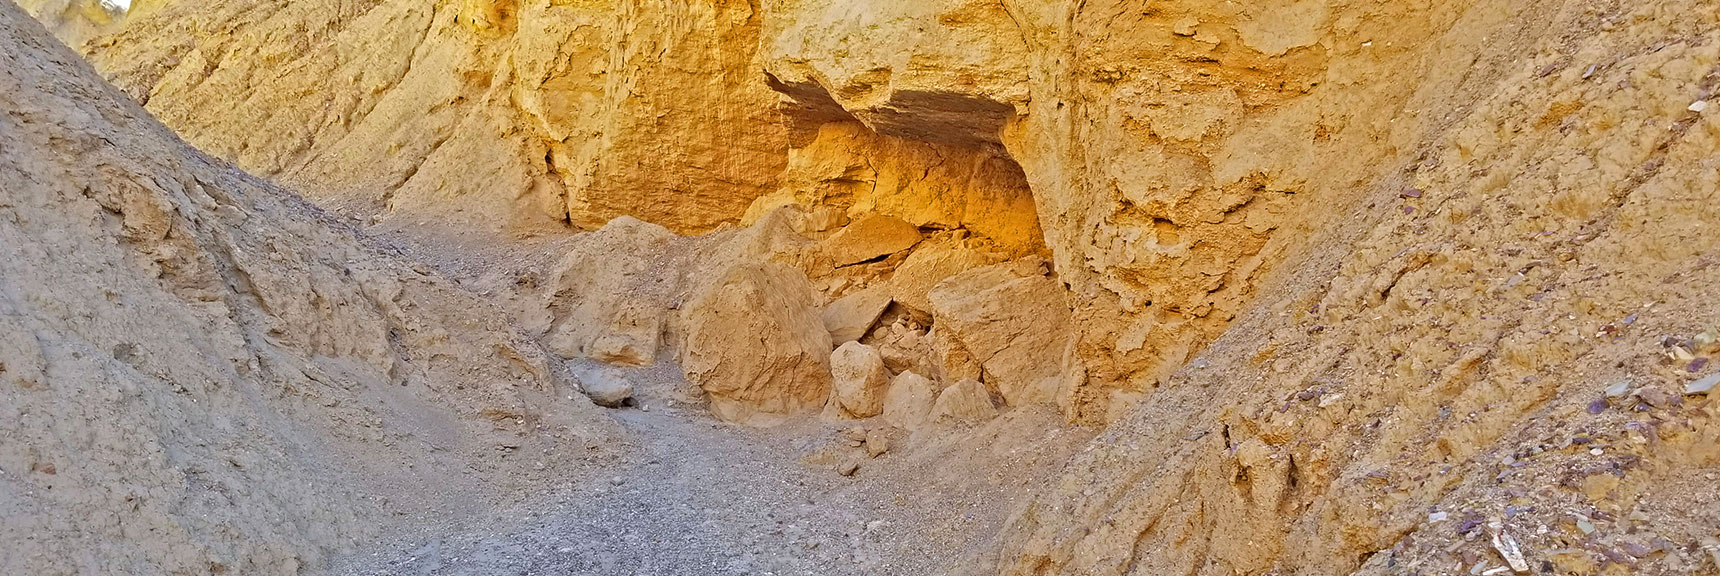 Rugged Beautiful Golden Walls in the Main Canyon Off Artist's Pallet | Artists Drive Hidden Canyon Hikes | Death Valley National Park, California